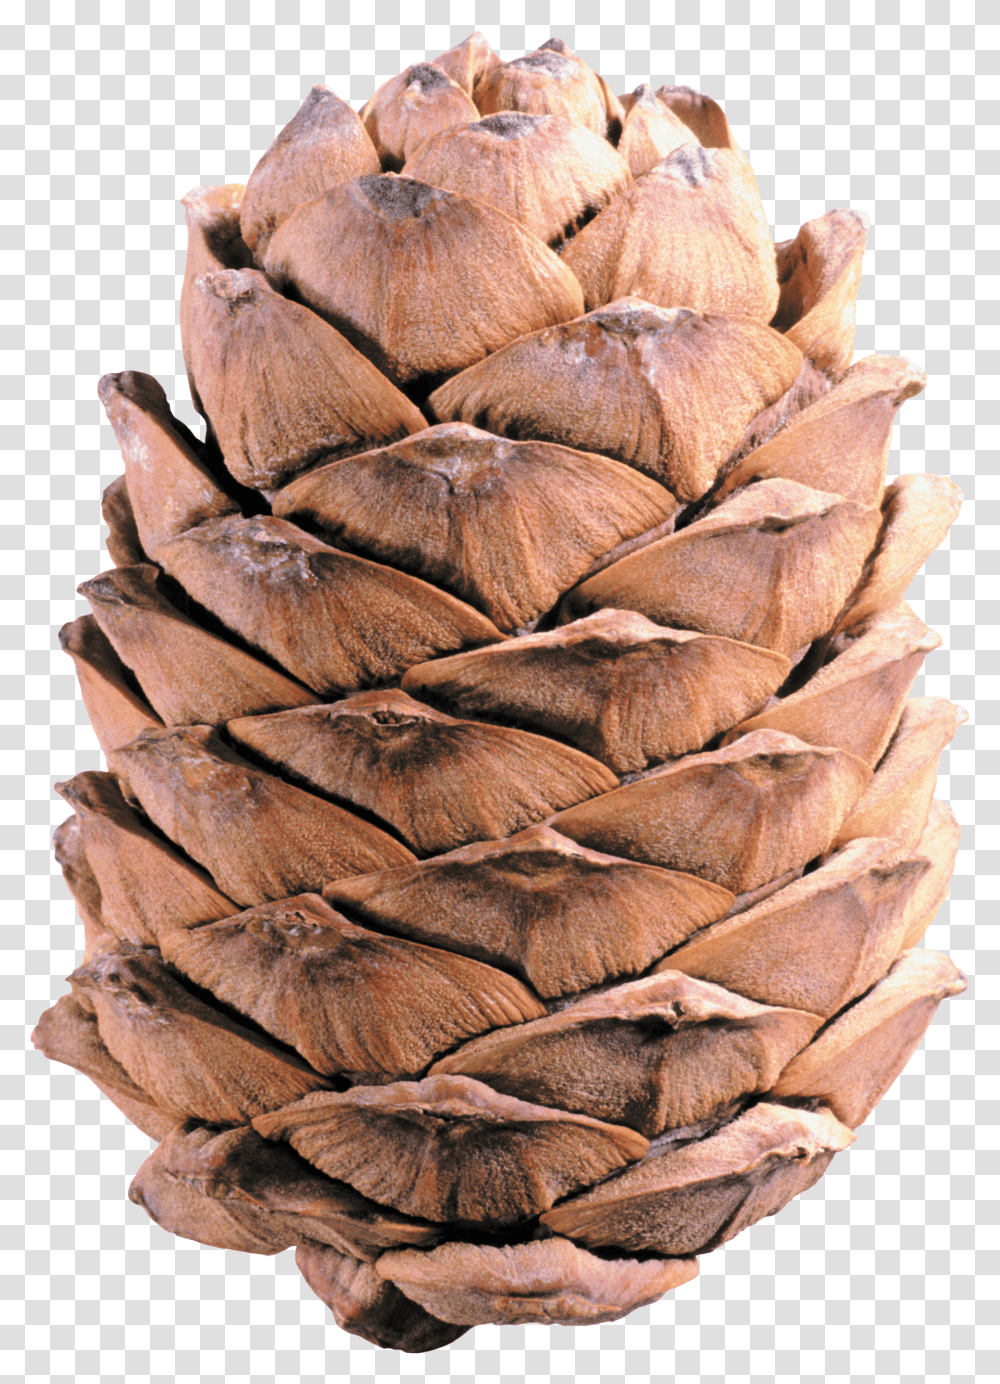 Pine Cone Image Free Download Pine Cone Background, Plant, Produce, Food, Vegetable Transparent Png